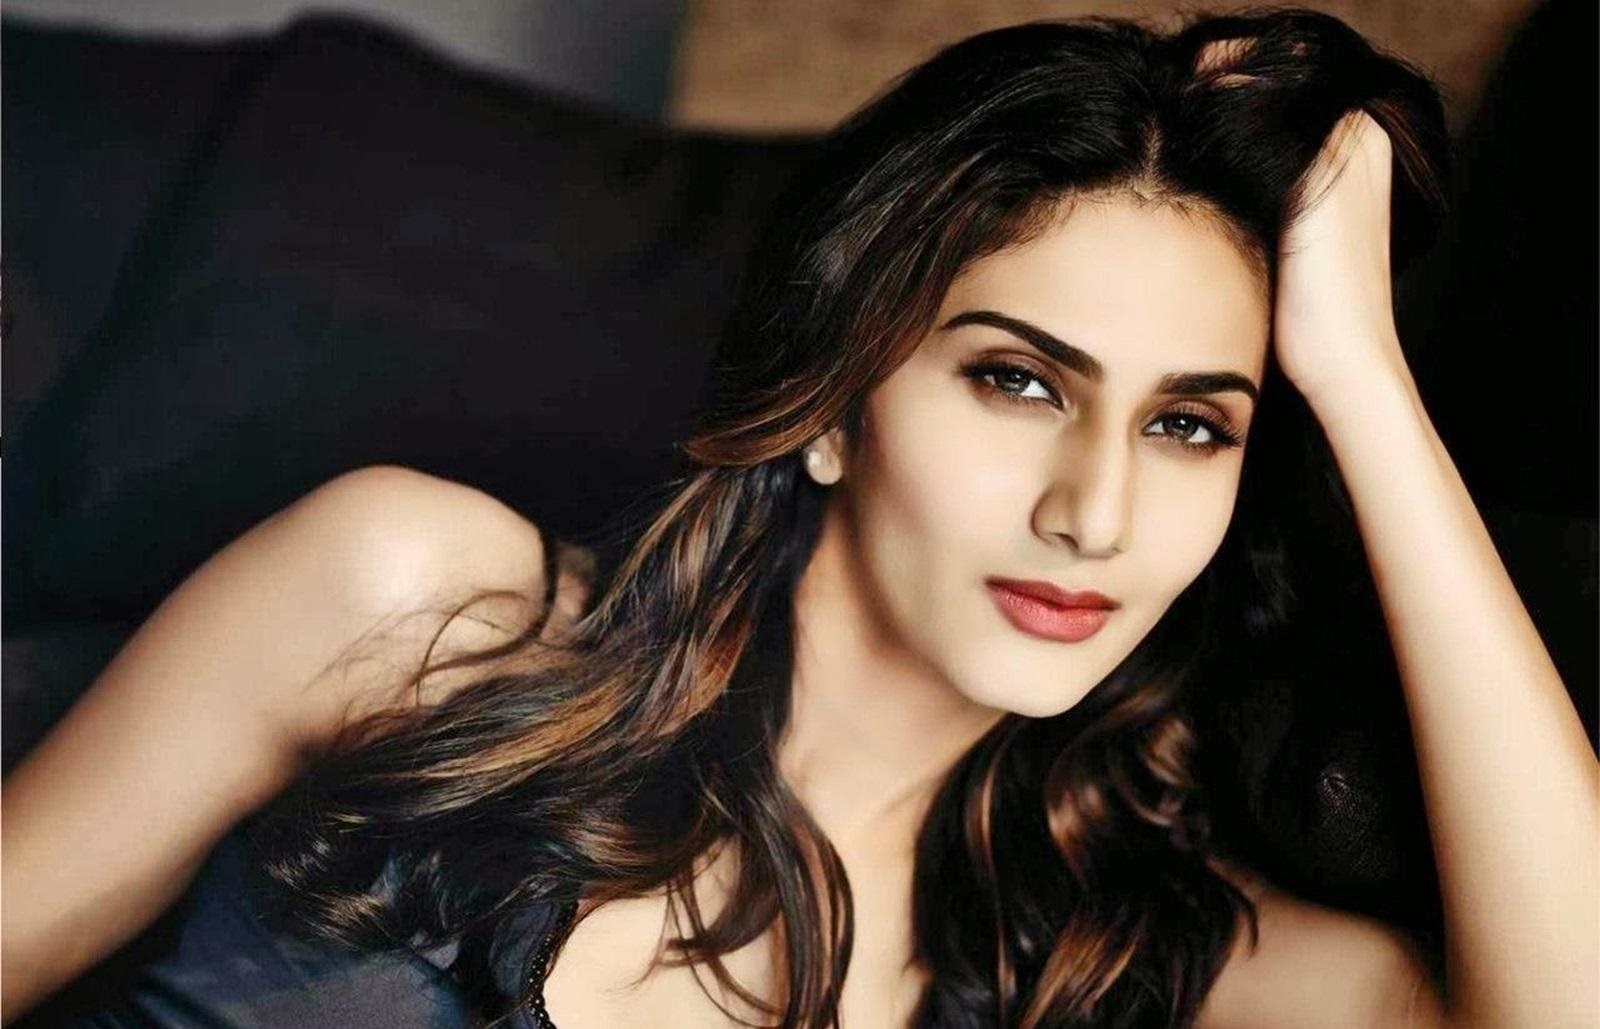 VAANI KAPOOR HOT AND SEXY WALLPAPERS COLLECTION